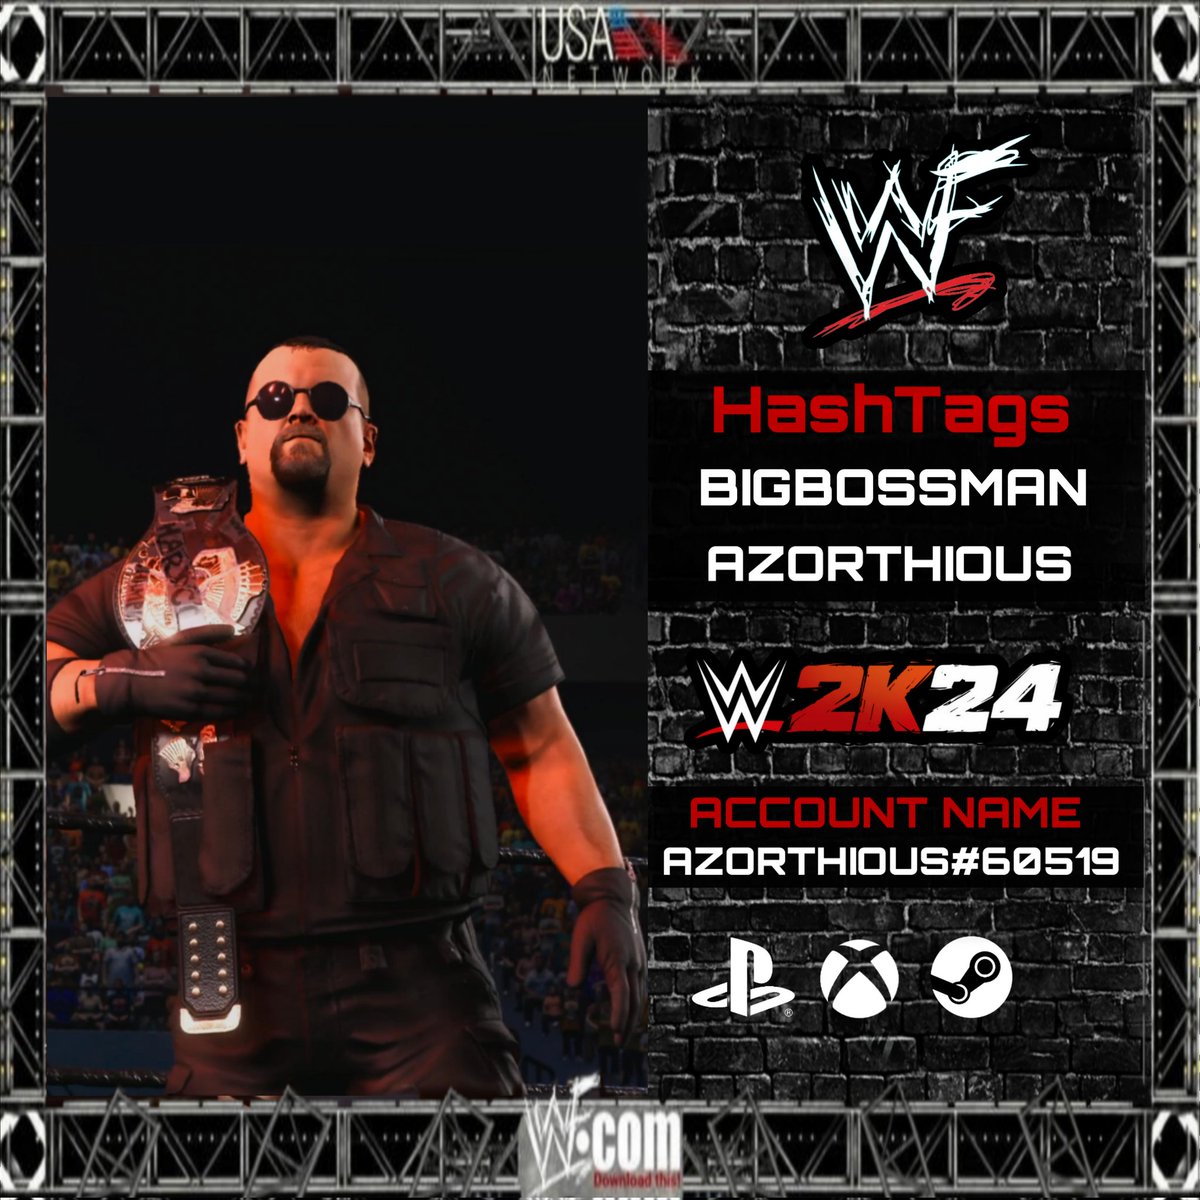 Big Boss Man '99 is Available Now on Community Creations! Includes 2 Attires, Flattened Hair, & Render. Search Tags: BigBossMan, Azorthious #WWE2K24